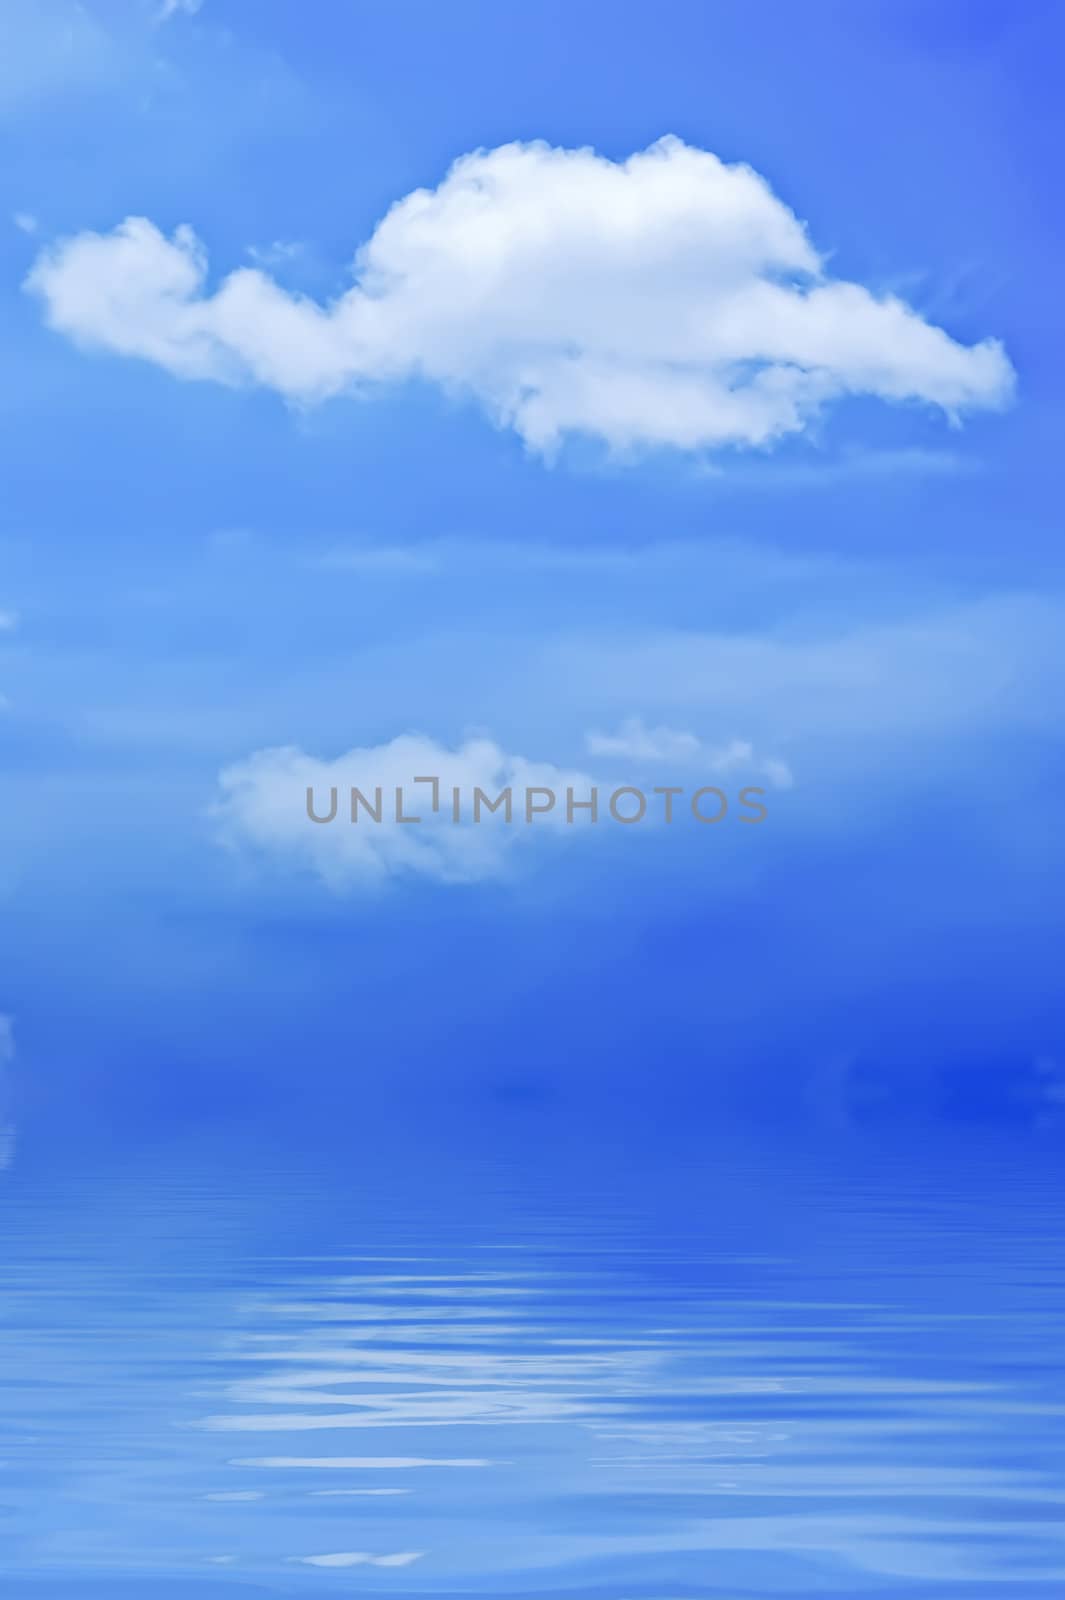 The sea and the sky background image by xfdly5